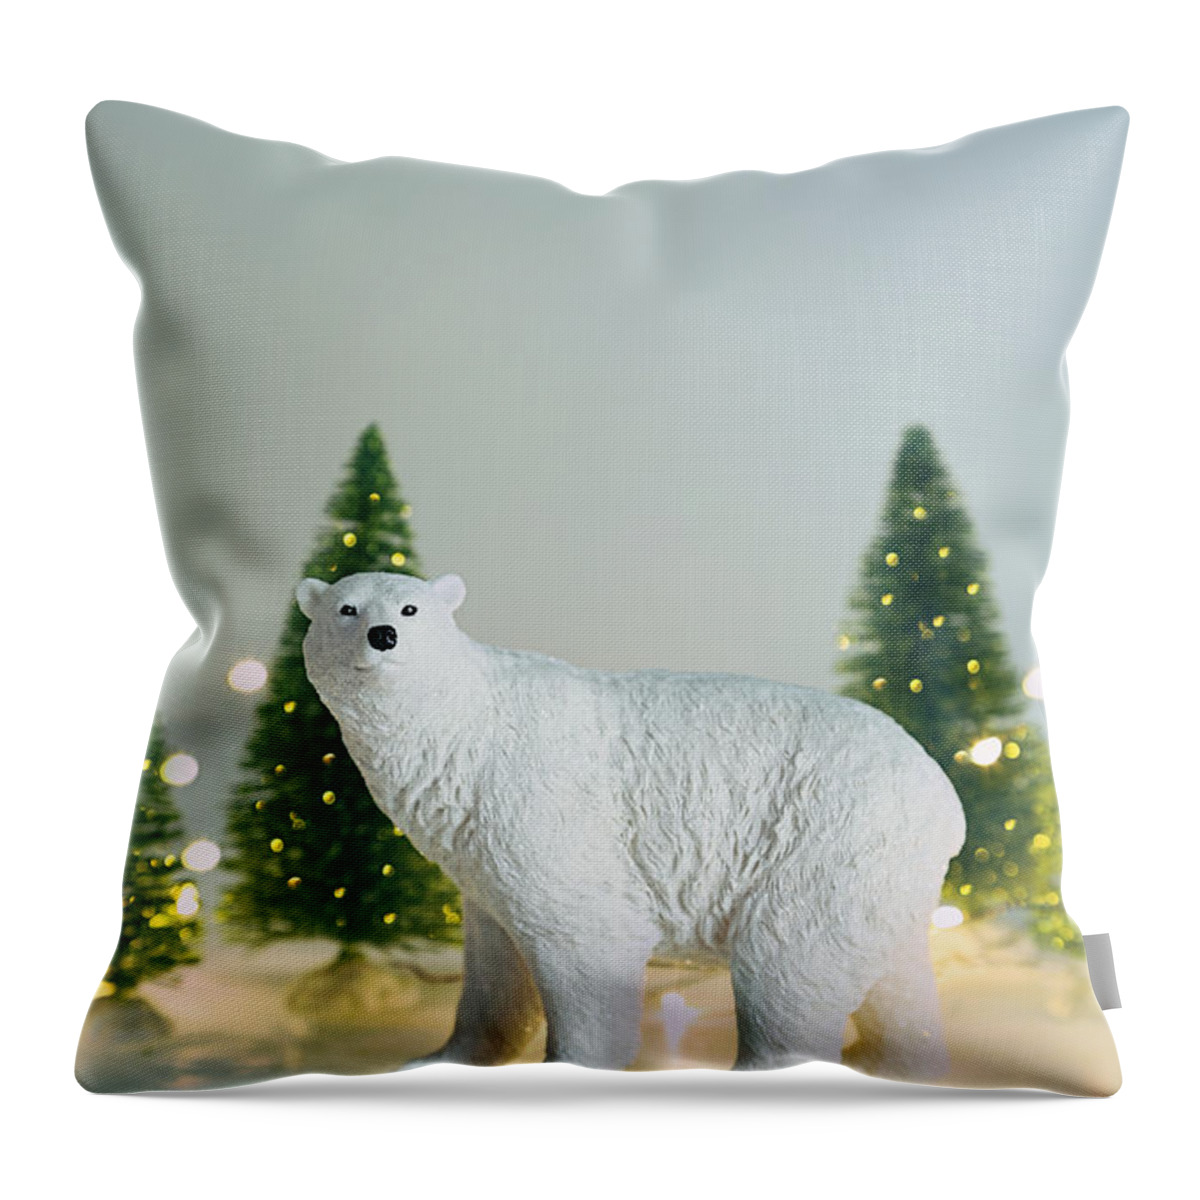 Christmas Throw Pillow featuring the photograph Toy polar bear with little trees and lights by Sandra Cunningham